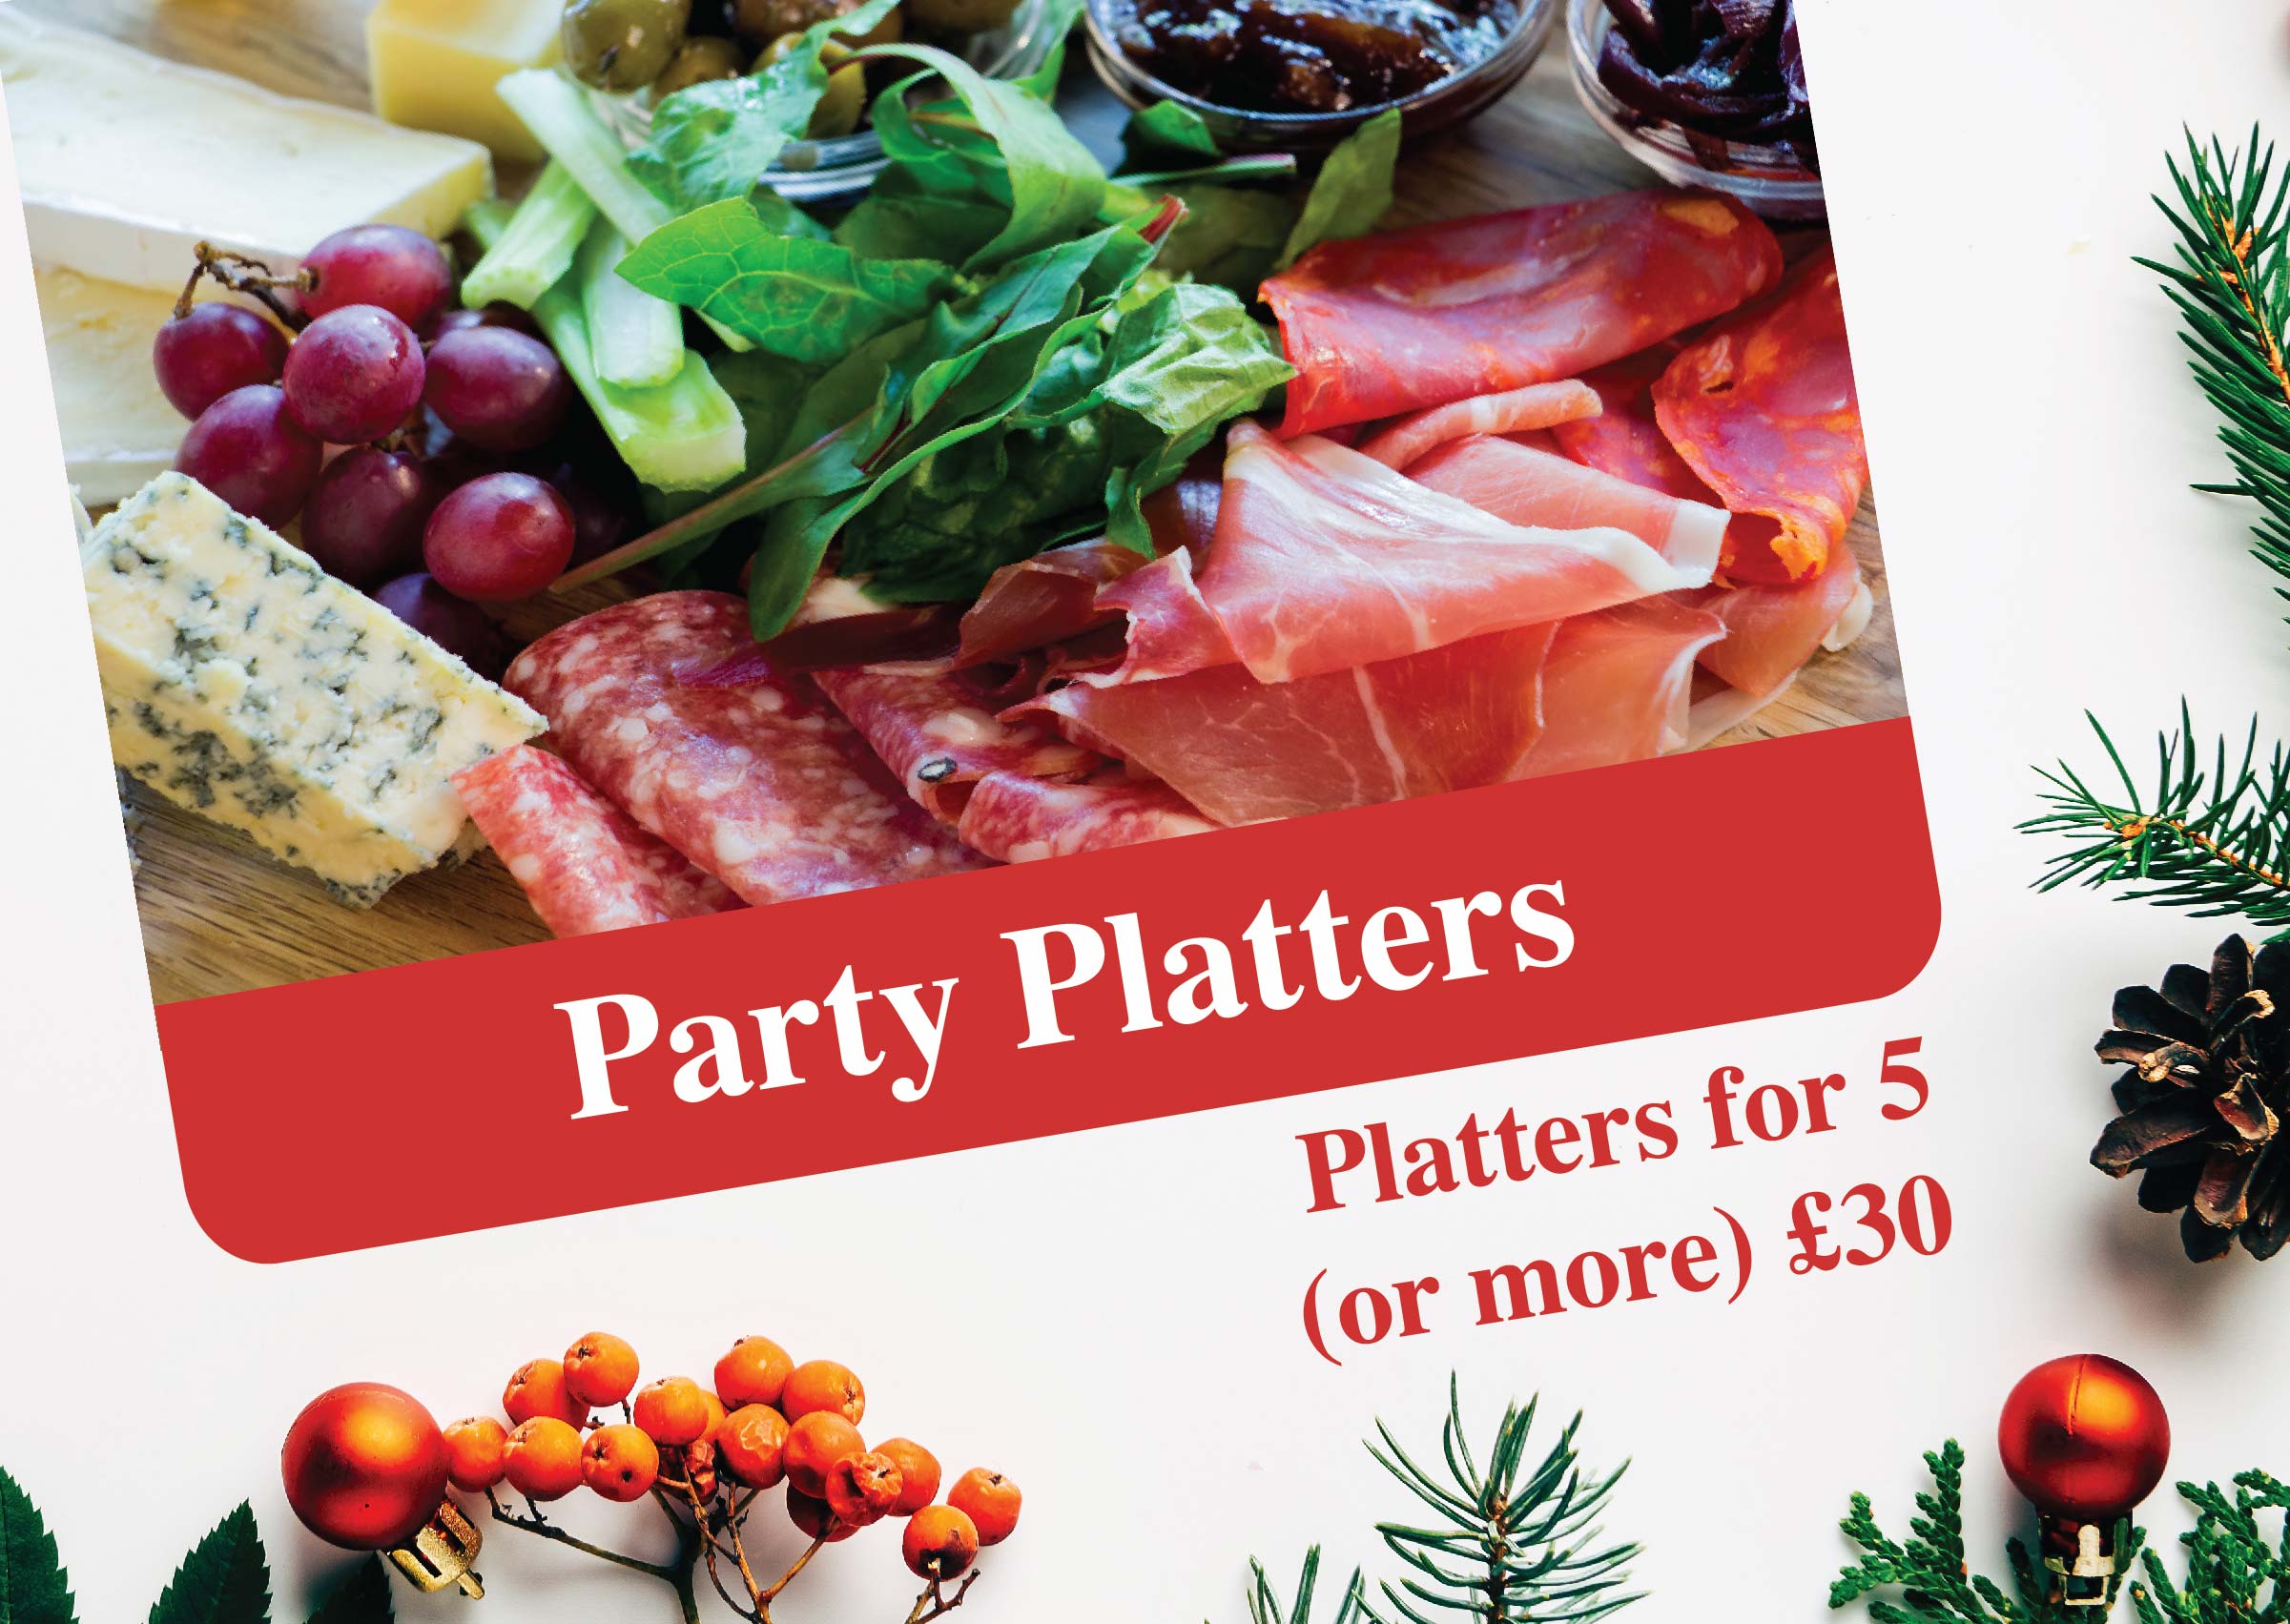 Platters for 5 (or more) £30